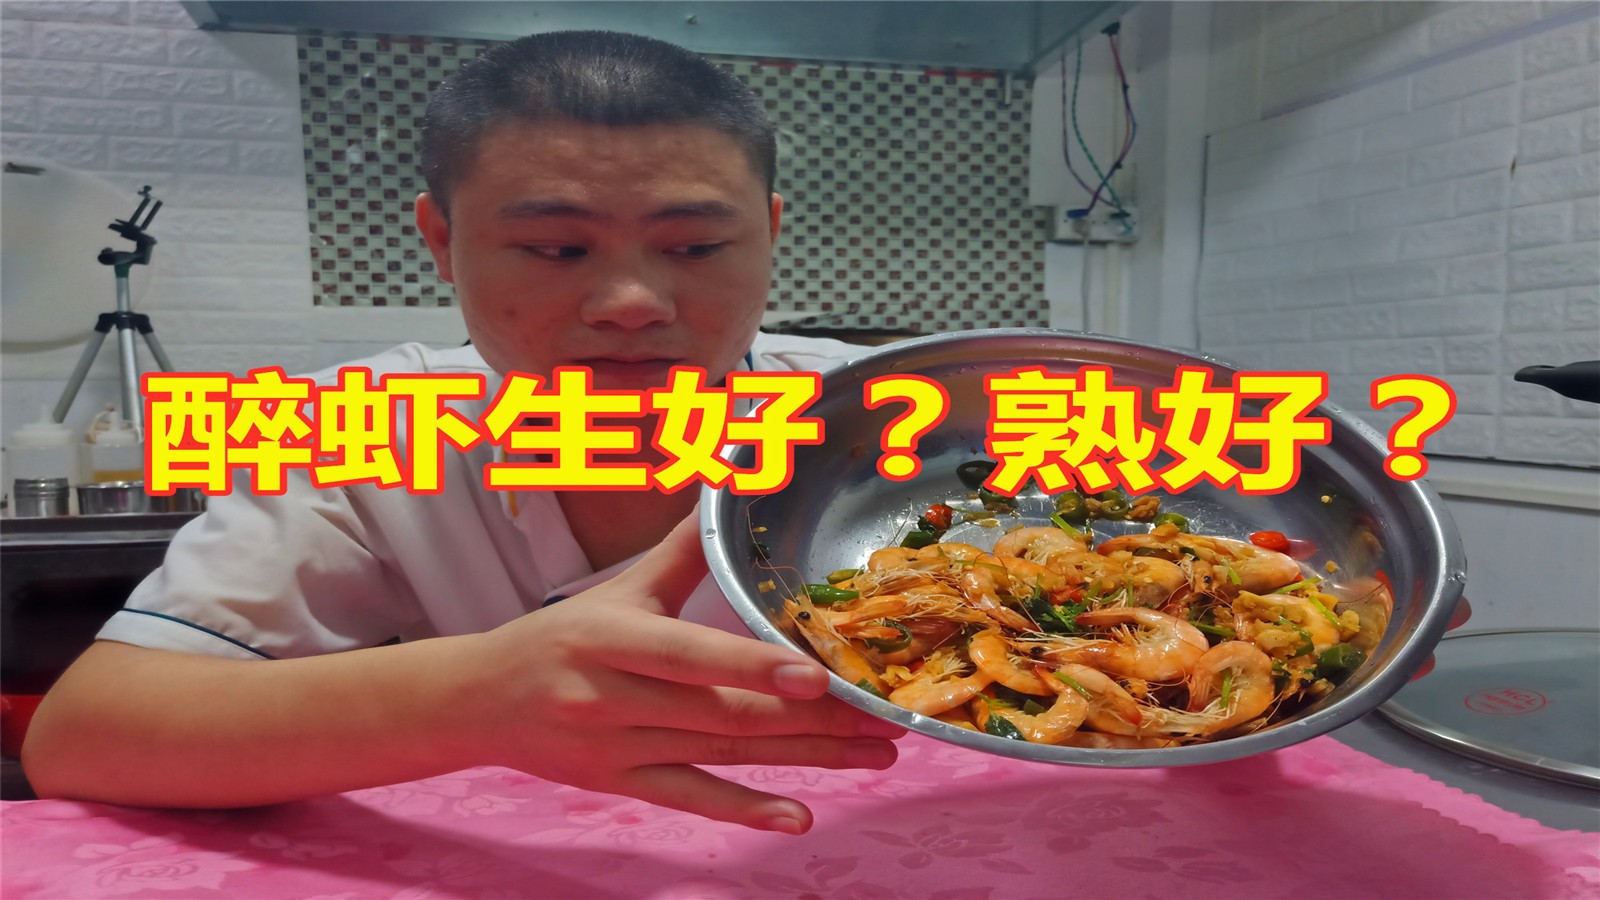 Can "drunk shrimp" still eat overnight? What does it taste like when it's ripe? Master Zhong gives you an answer